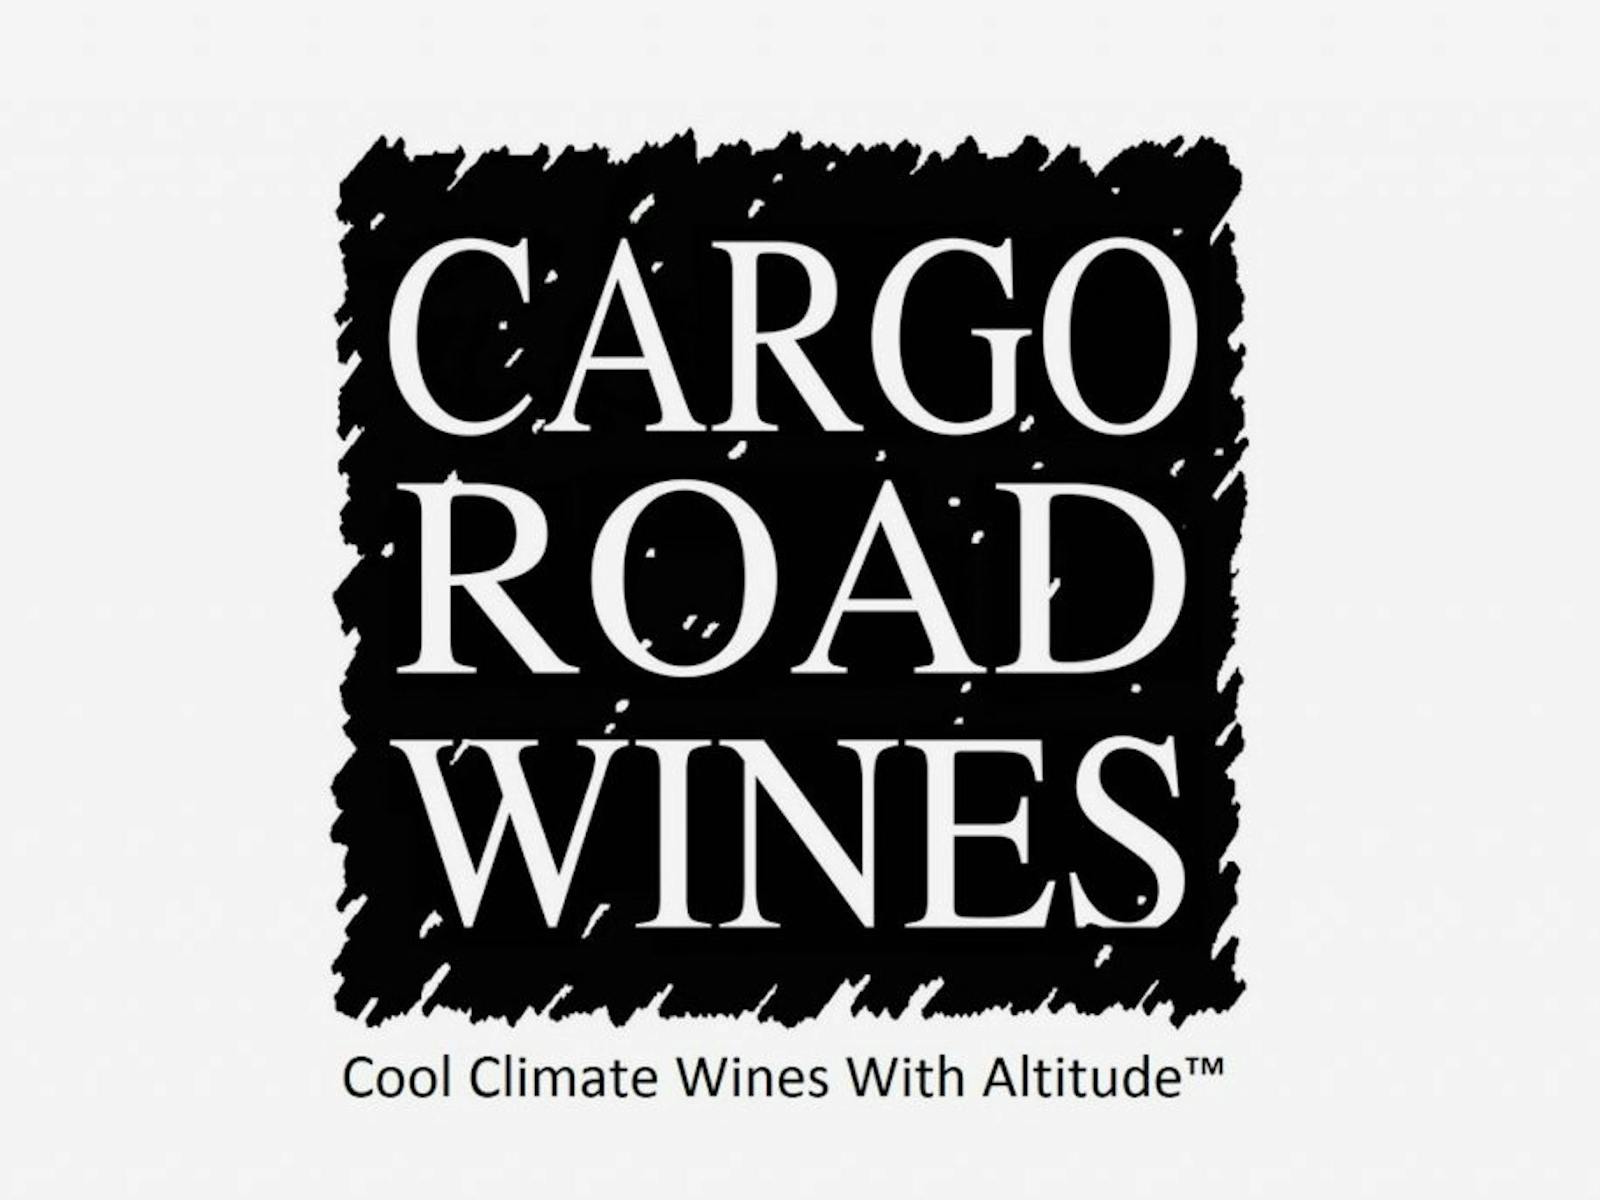 Image for Sunset Tour and Taste at Cargo Road Wines